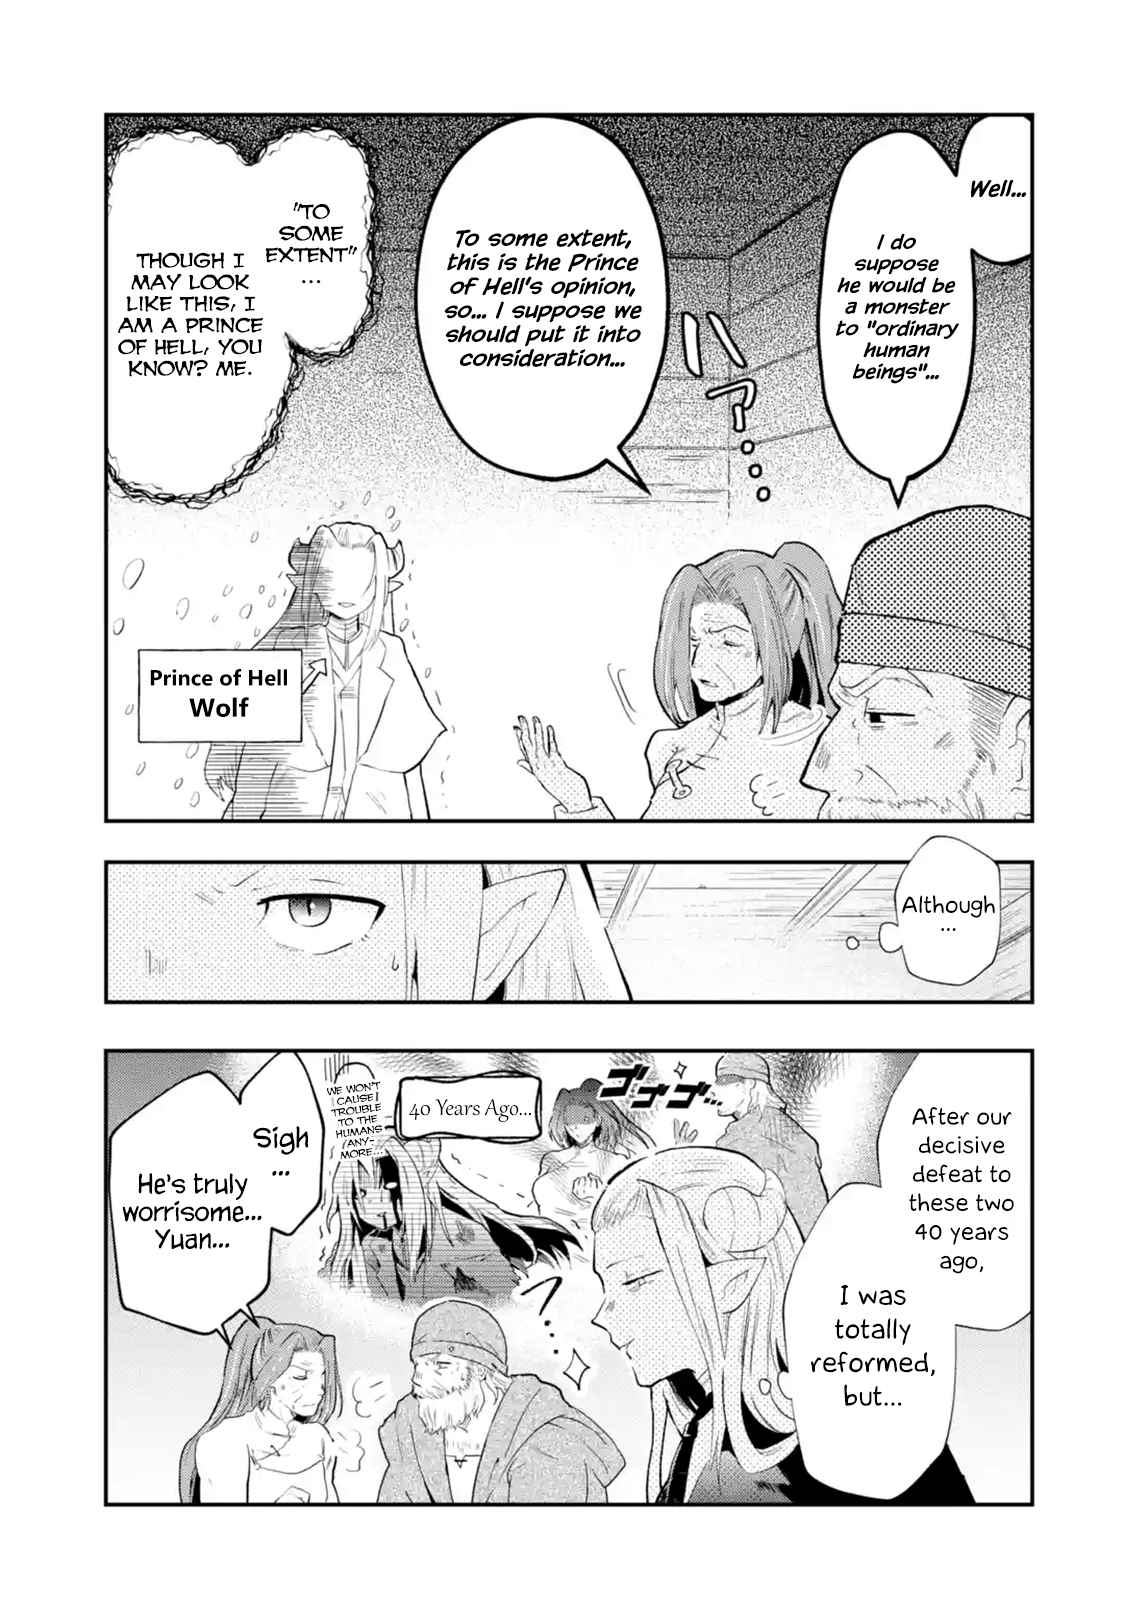 That Inferior Knight, Lv. 999 Ch. 1.4 That Boy, The Strongest Yet Oblivious to the World (4)